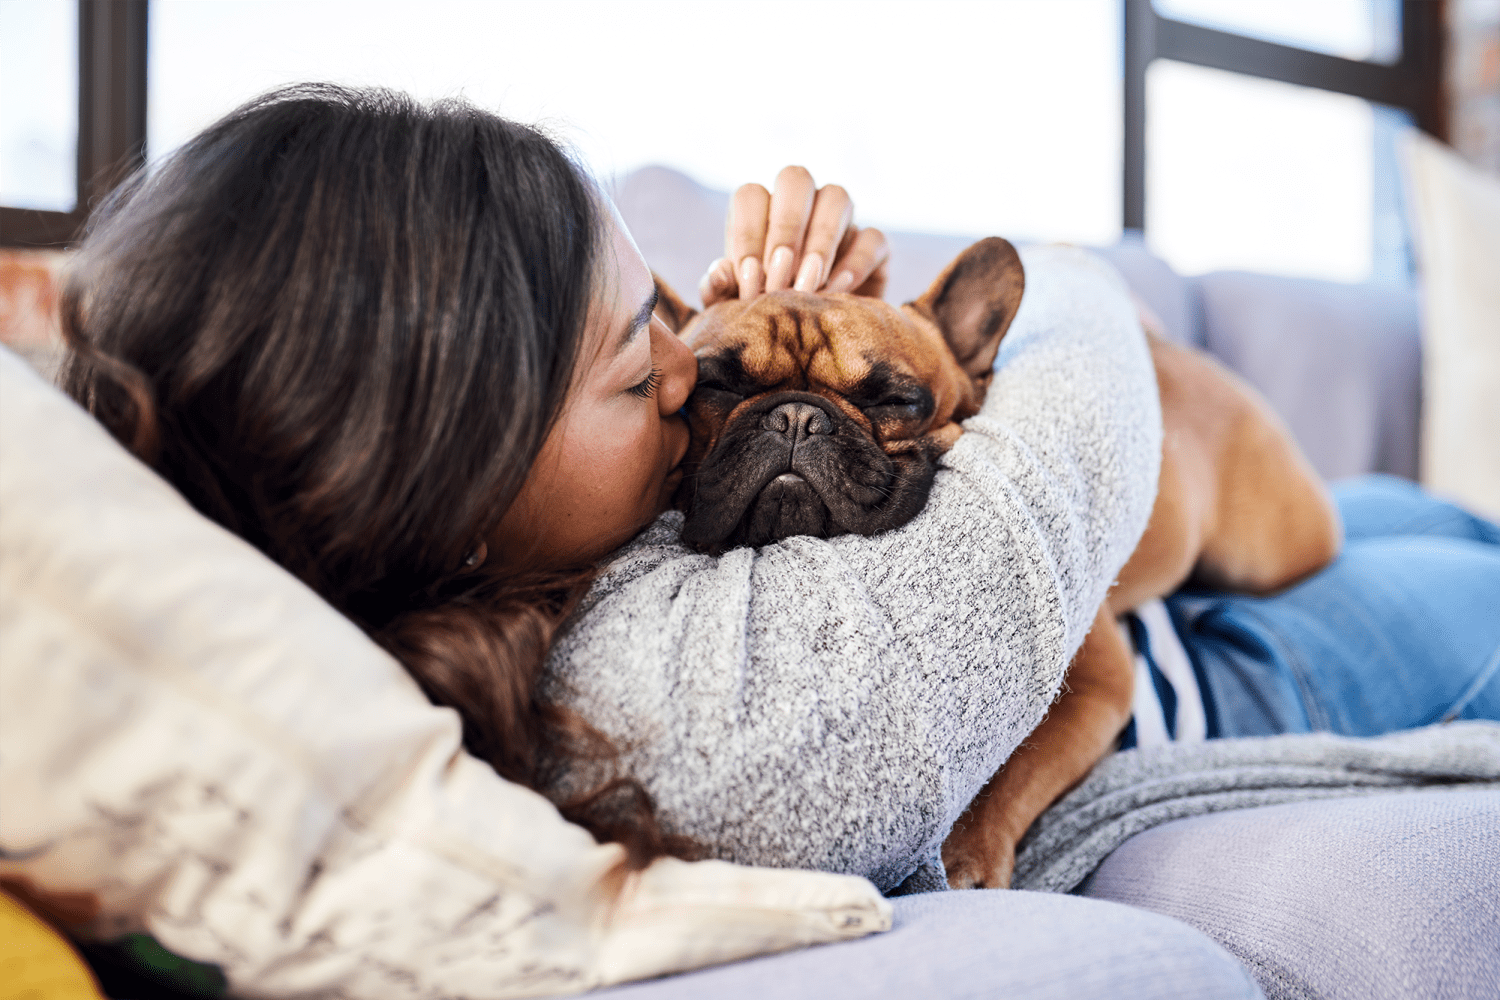 Resident snuggling with her French bulldog at Cranbury Crossing Apartment Homes in East Brunswick, New Jersey